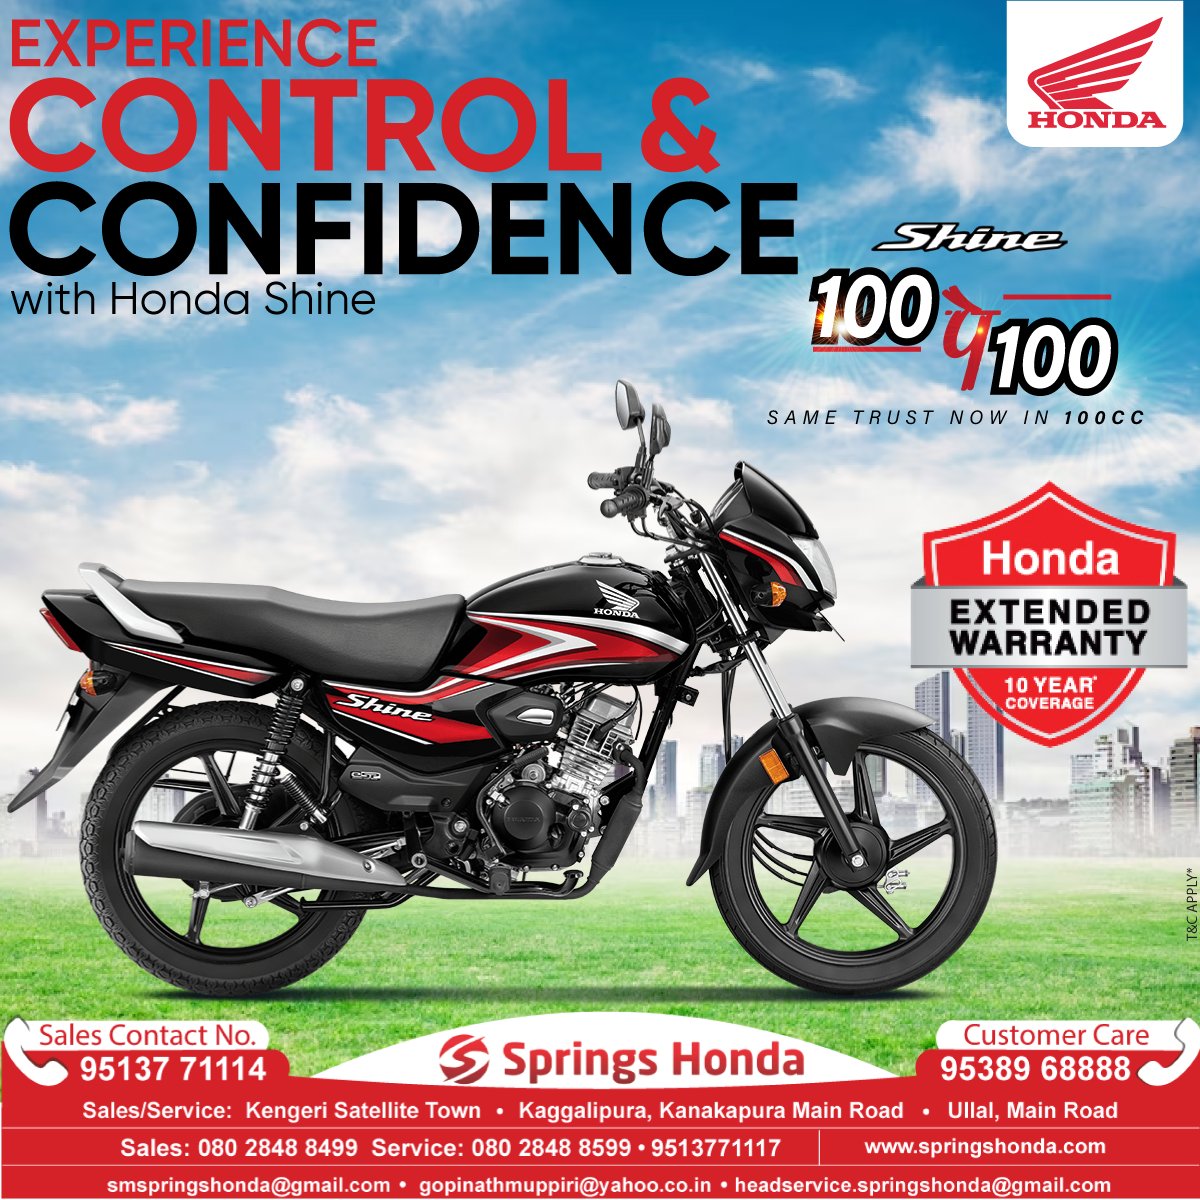 Experience control and confidence on every ride with the #HondaShine 100cc, now with the added assurance of a Honda Extended 10 Years Warranty. Unleash reliability and enjoy the journey with peace of mind. #RideWithConfidence 🏍️✨
Book Now!